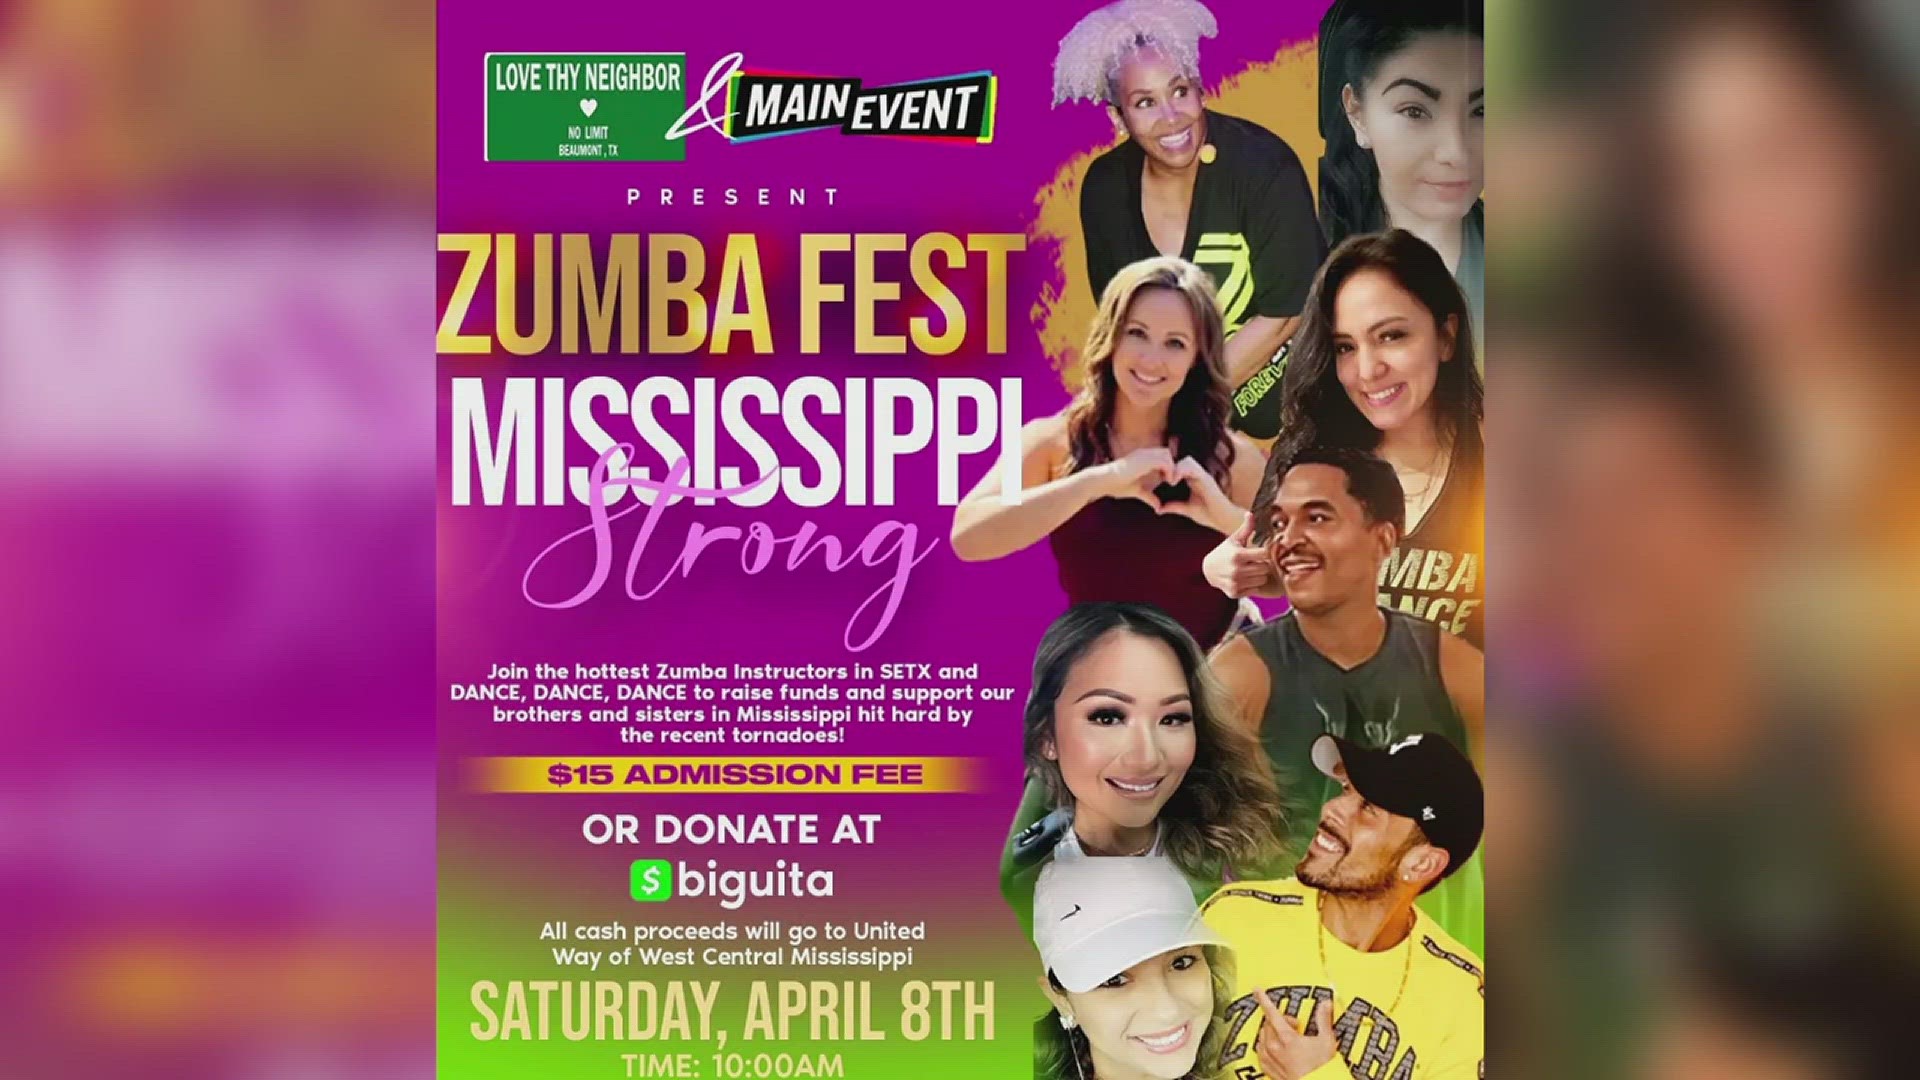 Admission to the Zumba event will be $15 and all proceeds will be donated to those impacted by the tornadoes in Rolling Folk, Mississippi.